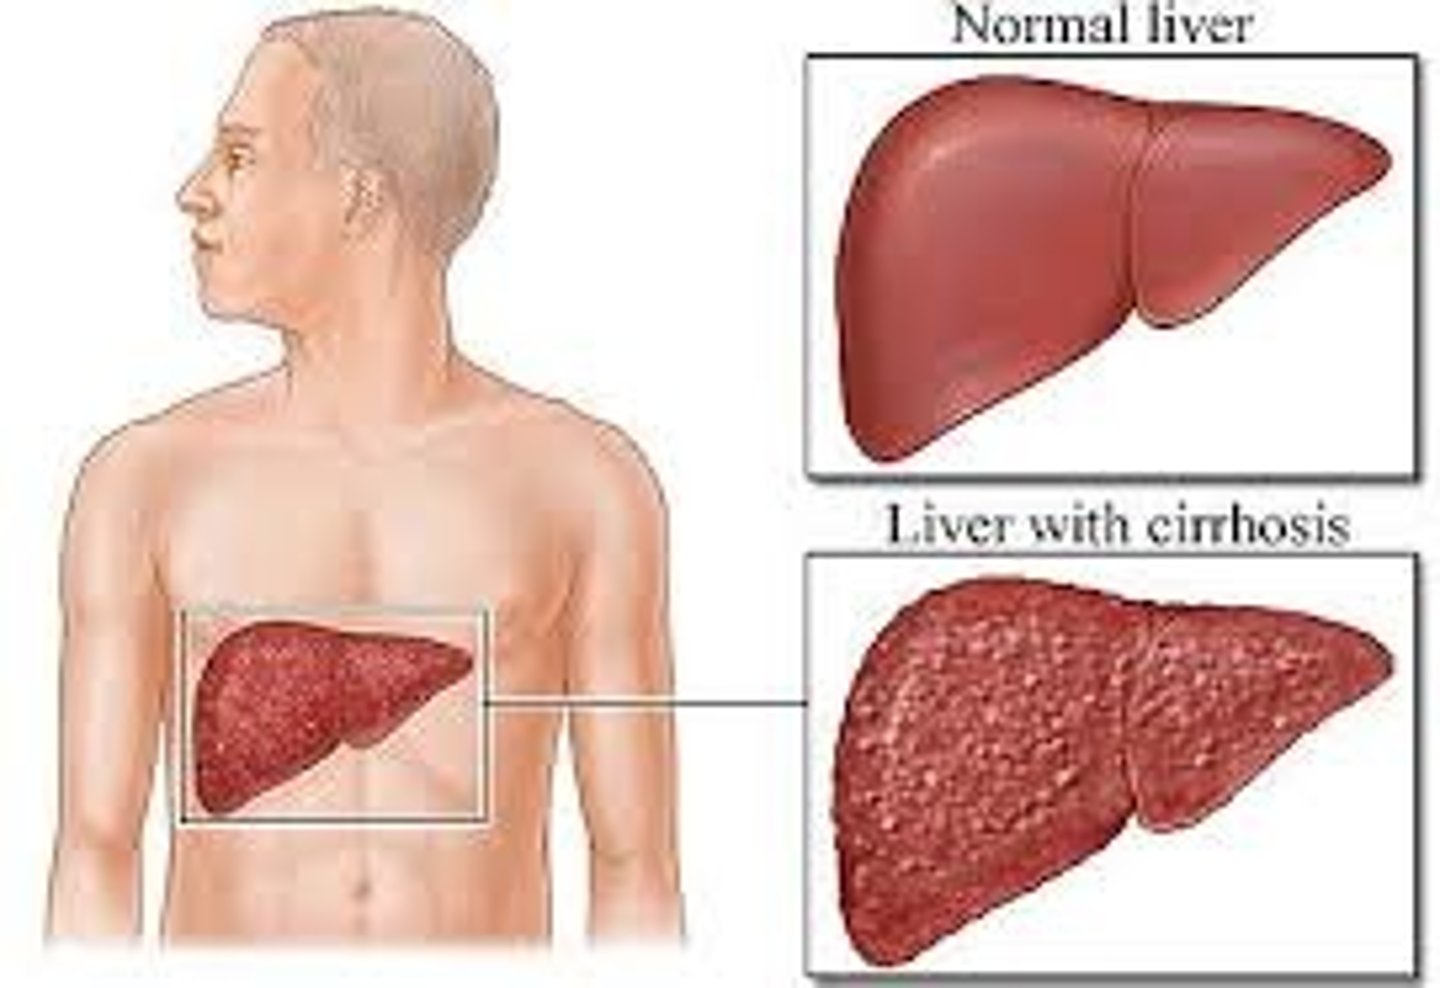 <p>Irreversible chronic injury of the liver as a result of chronic hepatitis</p>